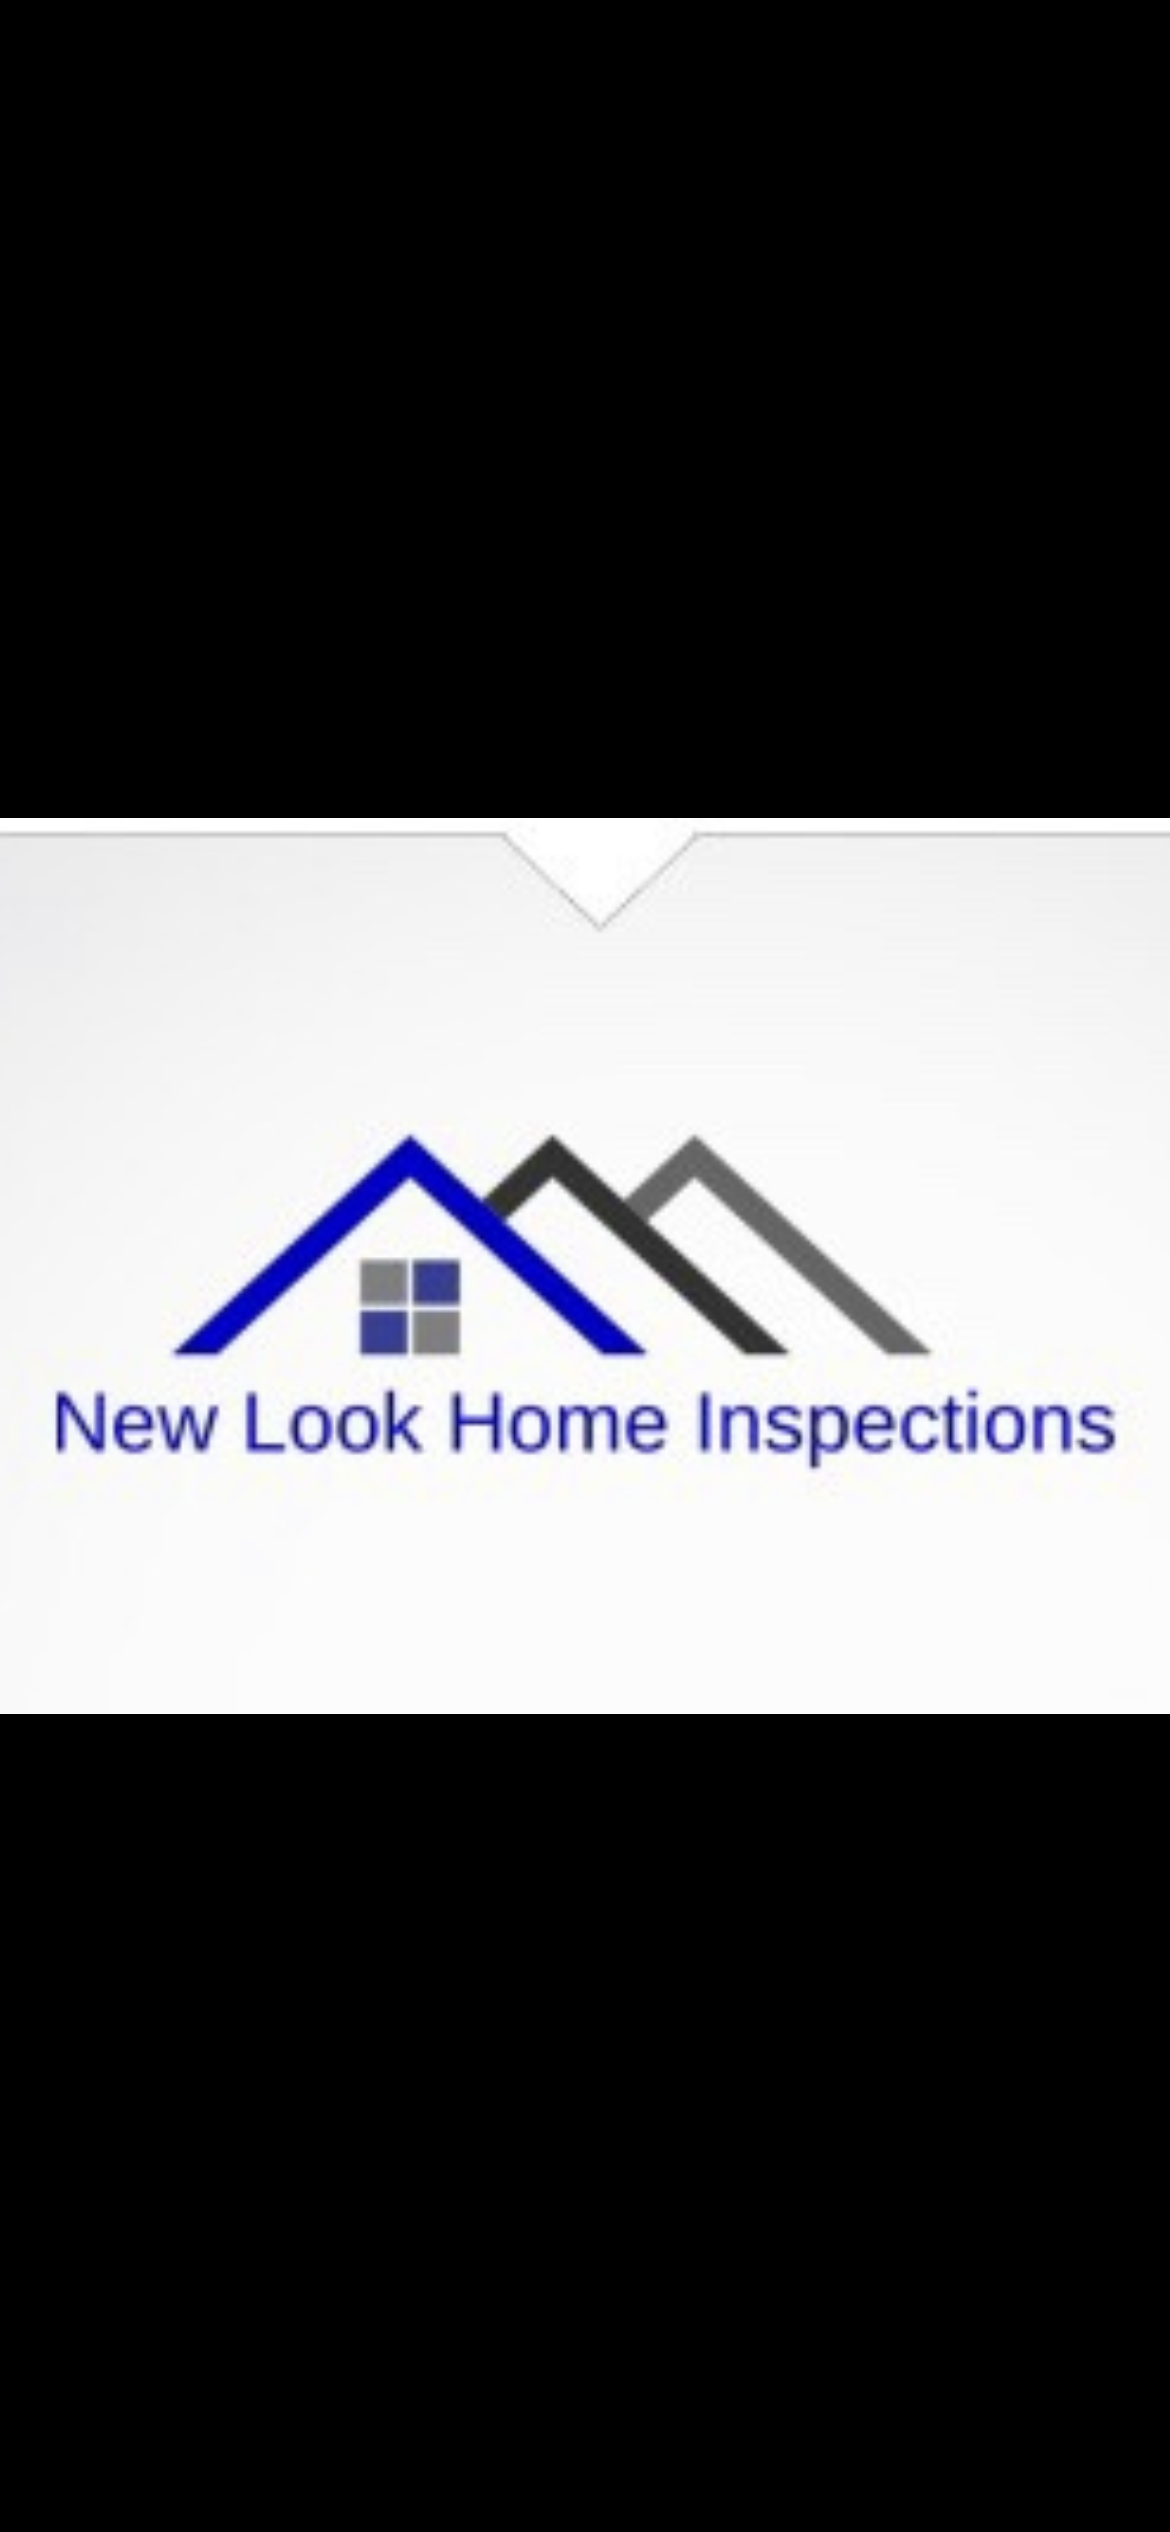 New Look Home Inspections Logo